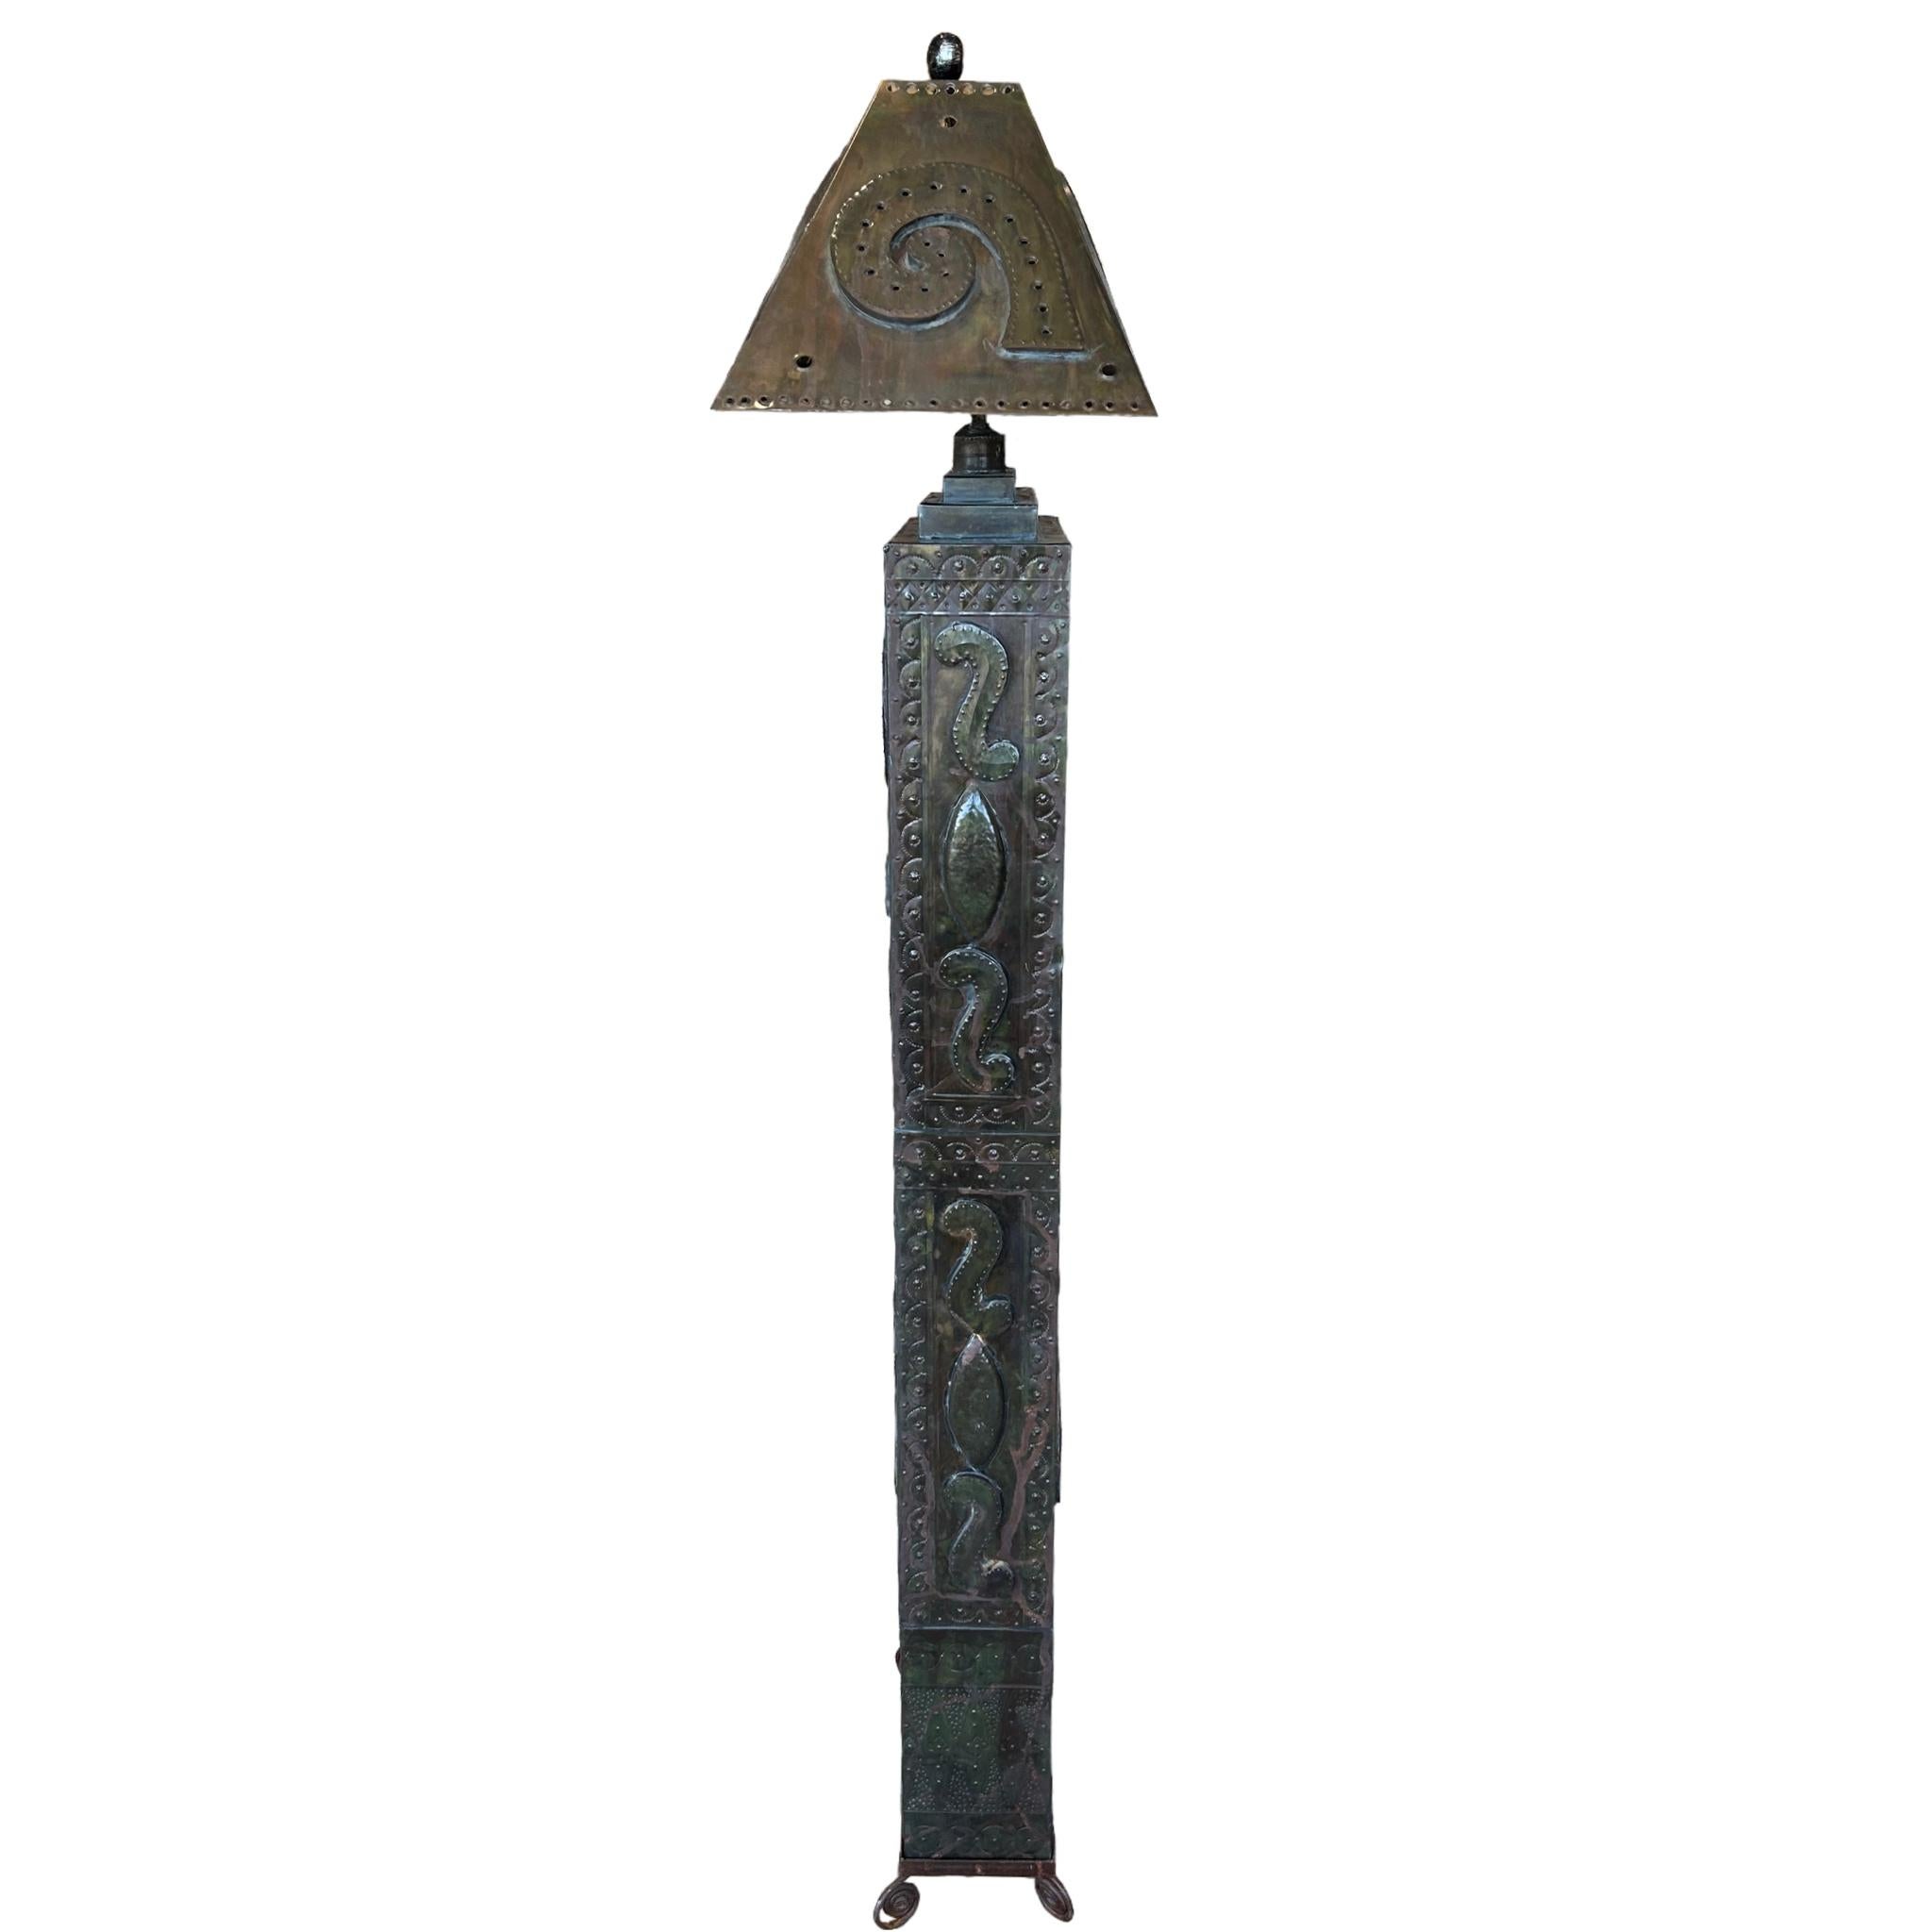 Brutalist Primitive Punched Tin Metal Floor Lamp

Details including patterns and punched holes throughout the structure

Rustic Texture throughout
